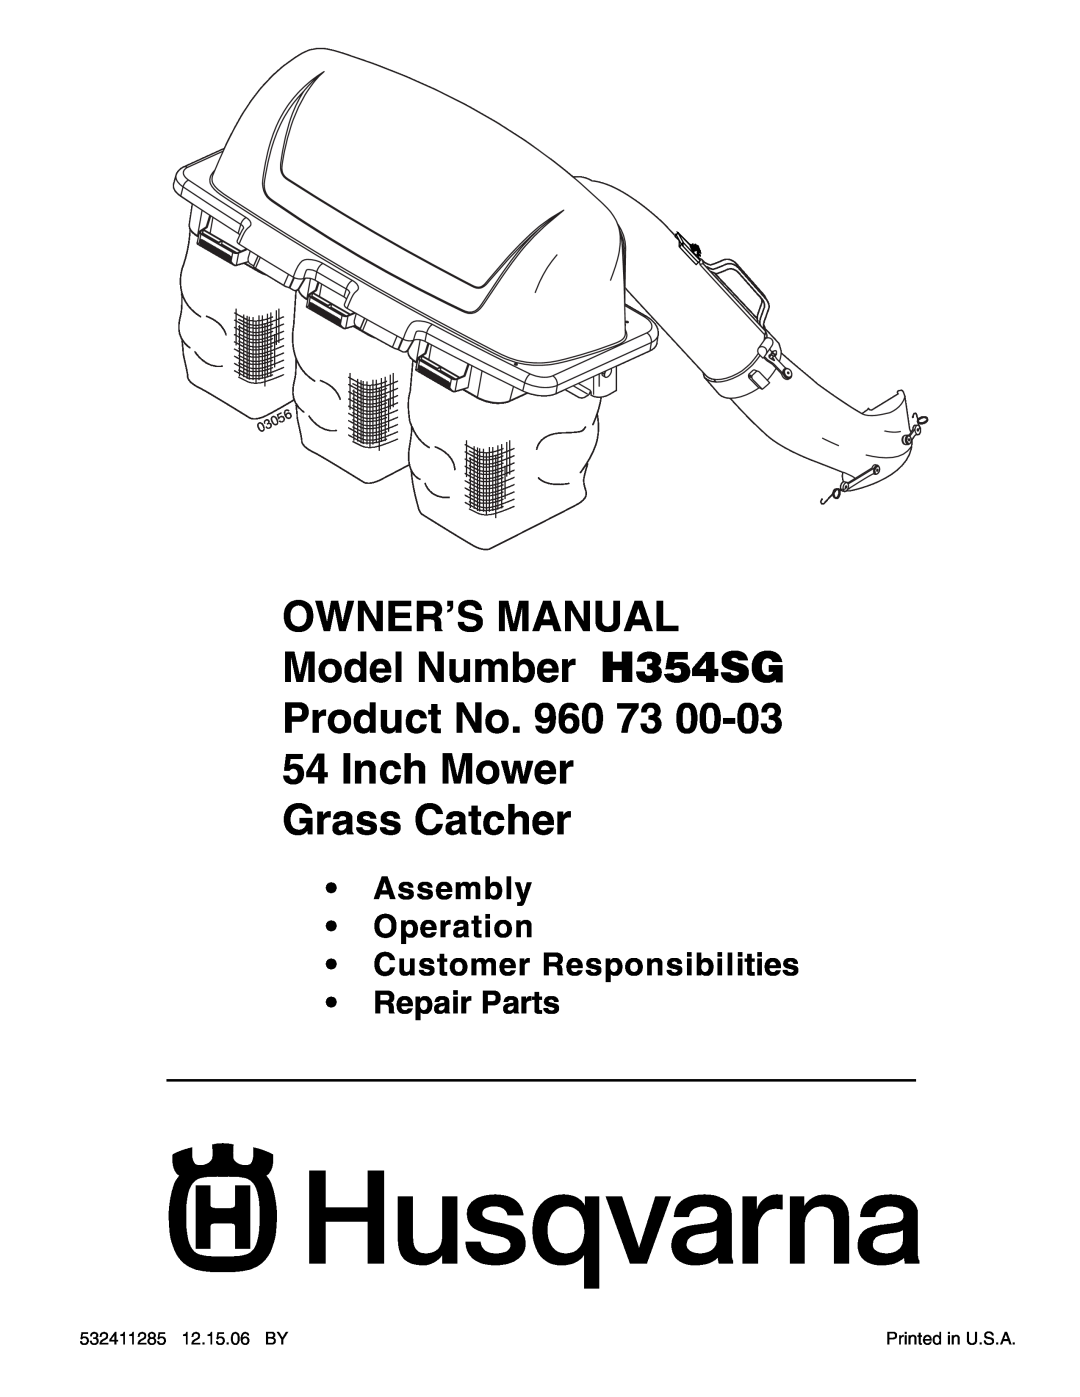 Husqvarna owner manual OWNER’S MANUAL Model Number H354SG Product No. 960 73 54 Inch Mower, Grass Catcher 